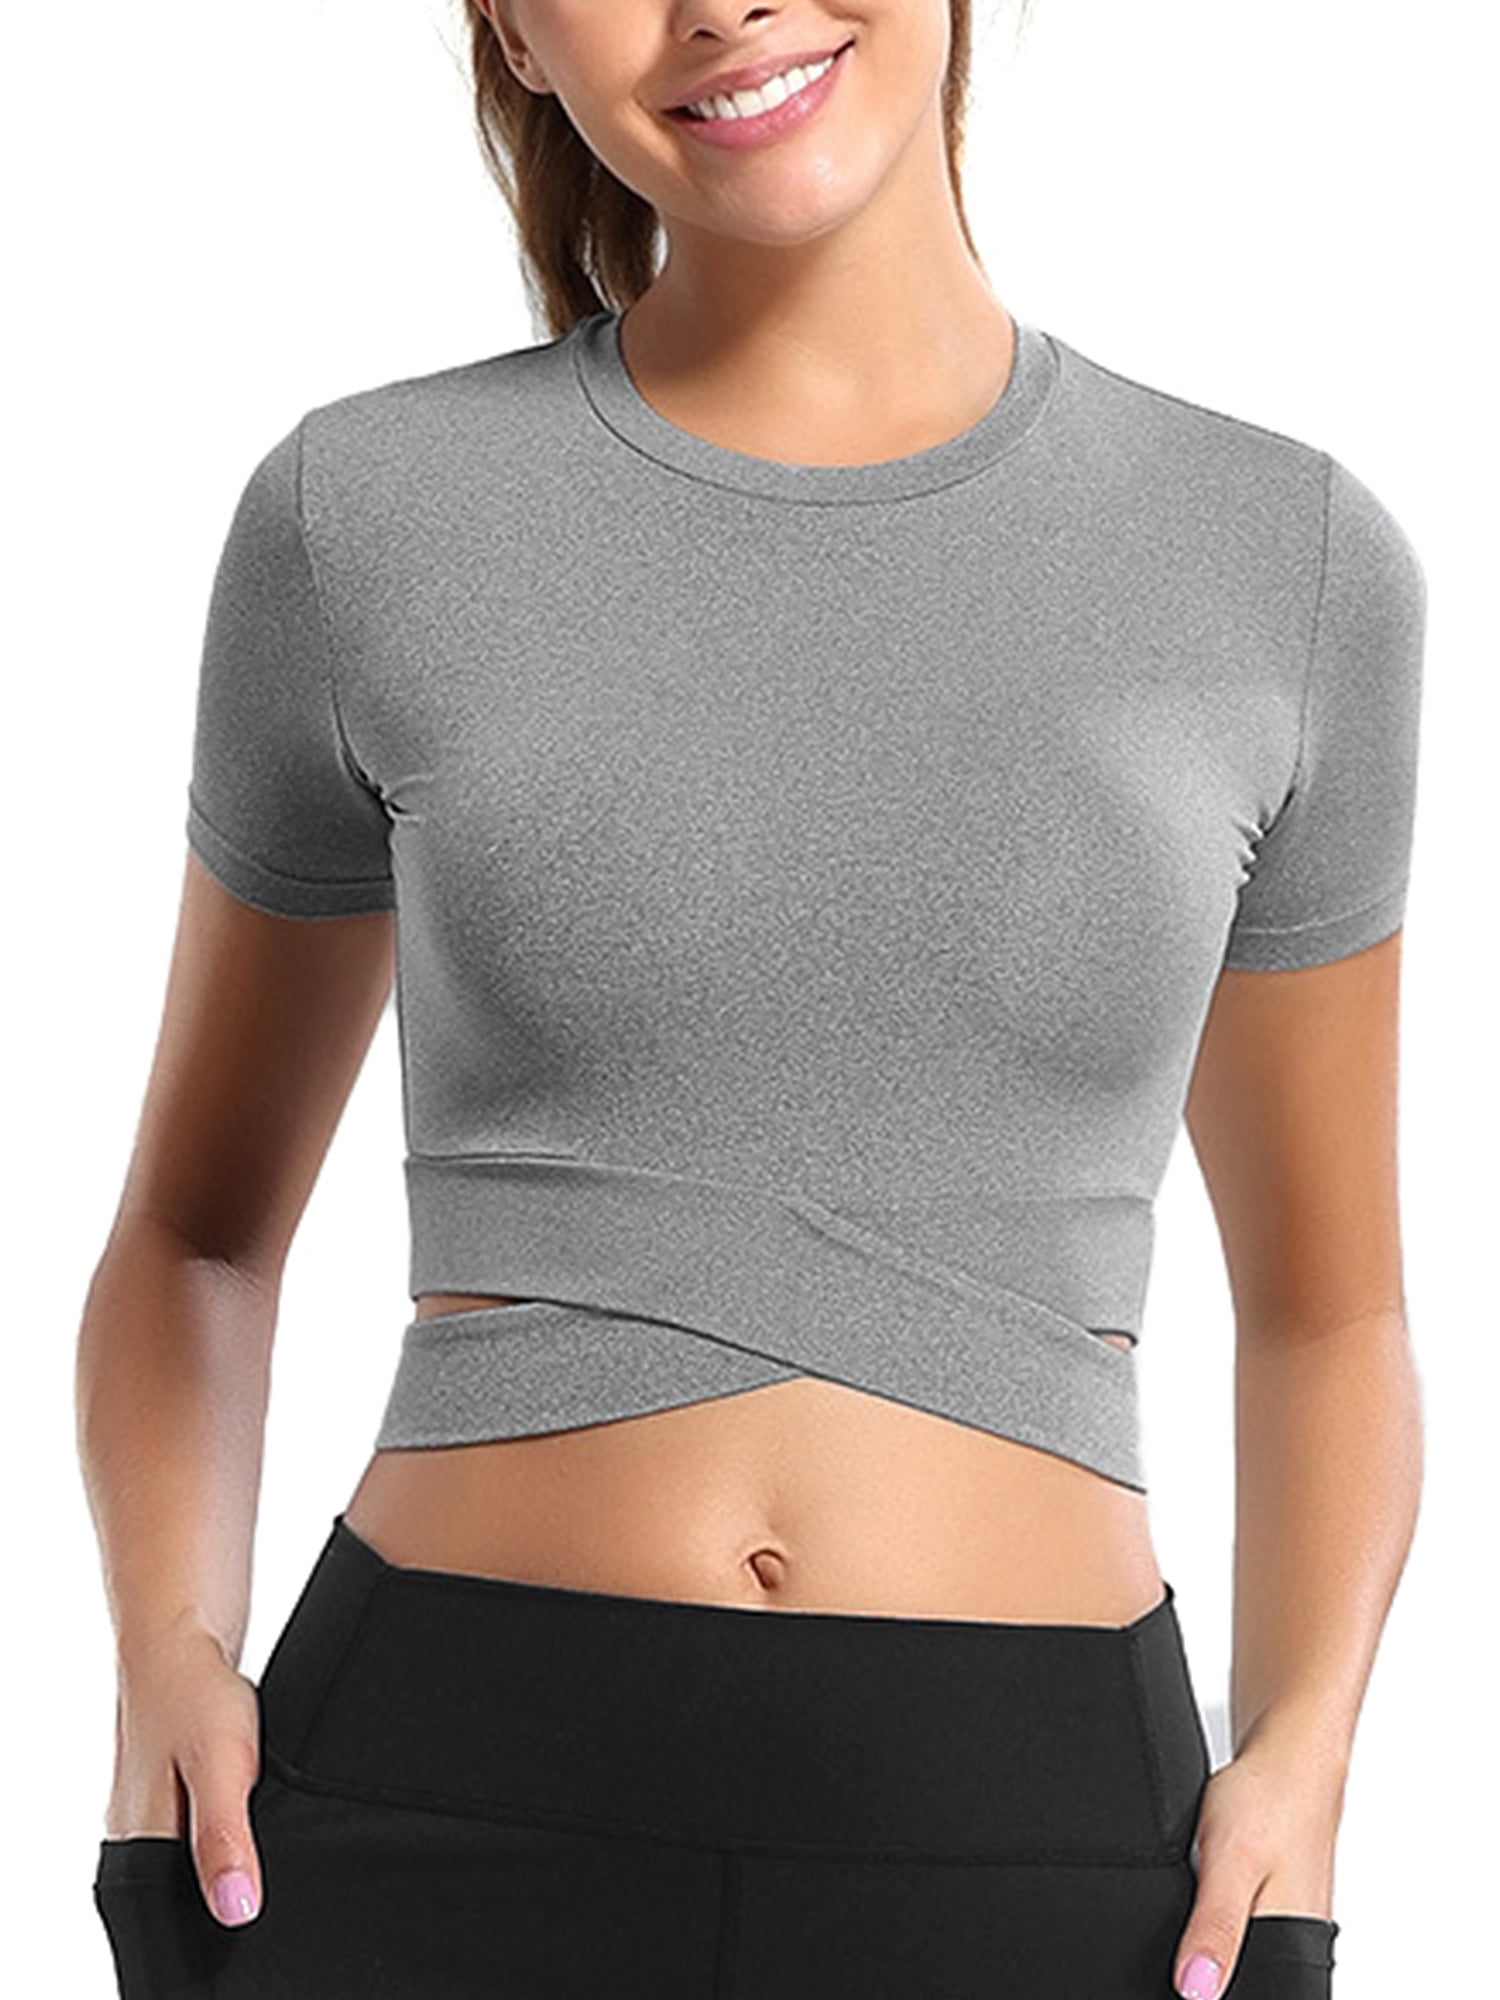 Sexy Dance Women's Crop Top Yoga Shirts Moisture-Wicking Tummy Cross Gym  Fitness Running Long Sleeve Compression Shirts Athletic Activewear for  Women